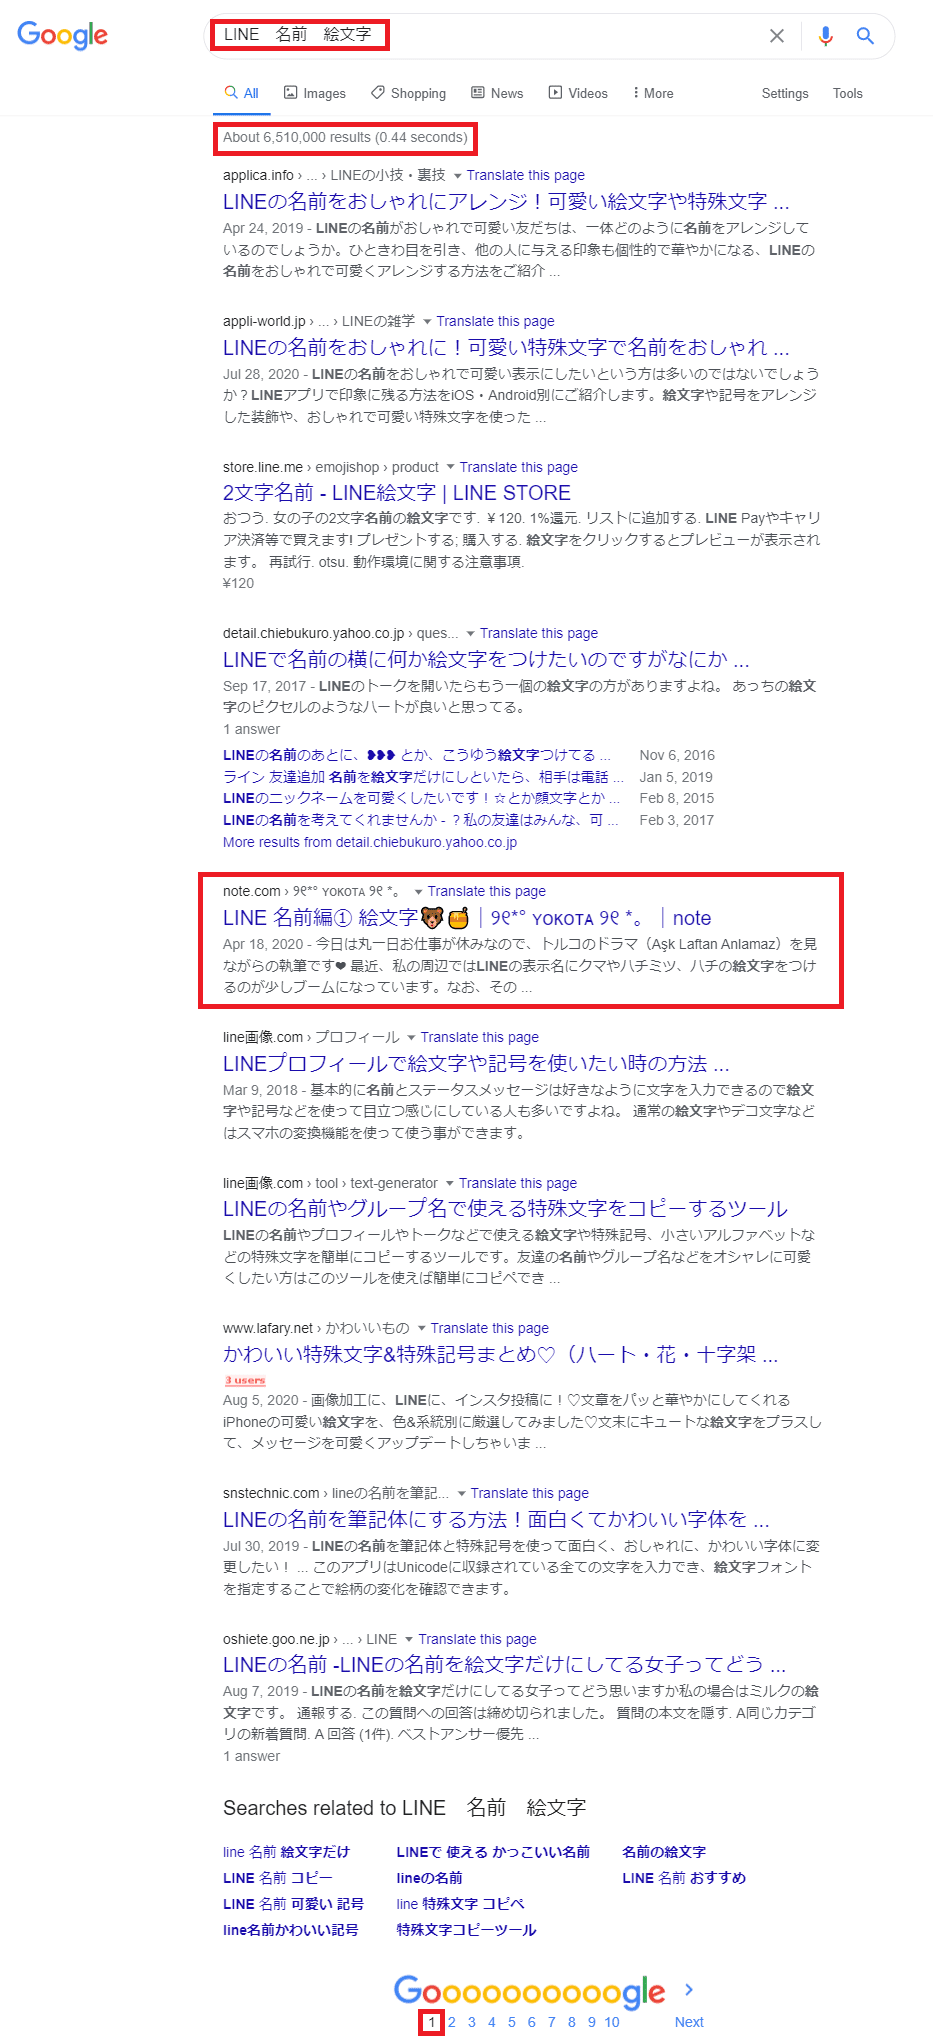 Seo Noteにハマる理由 ୨୧ ʏᴏᴋᴏᴛᴀ ୨୧ Note